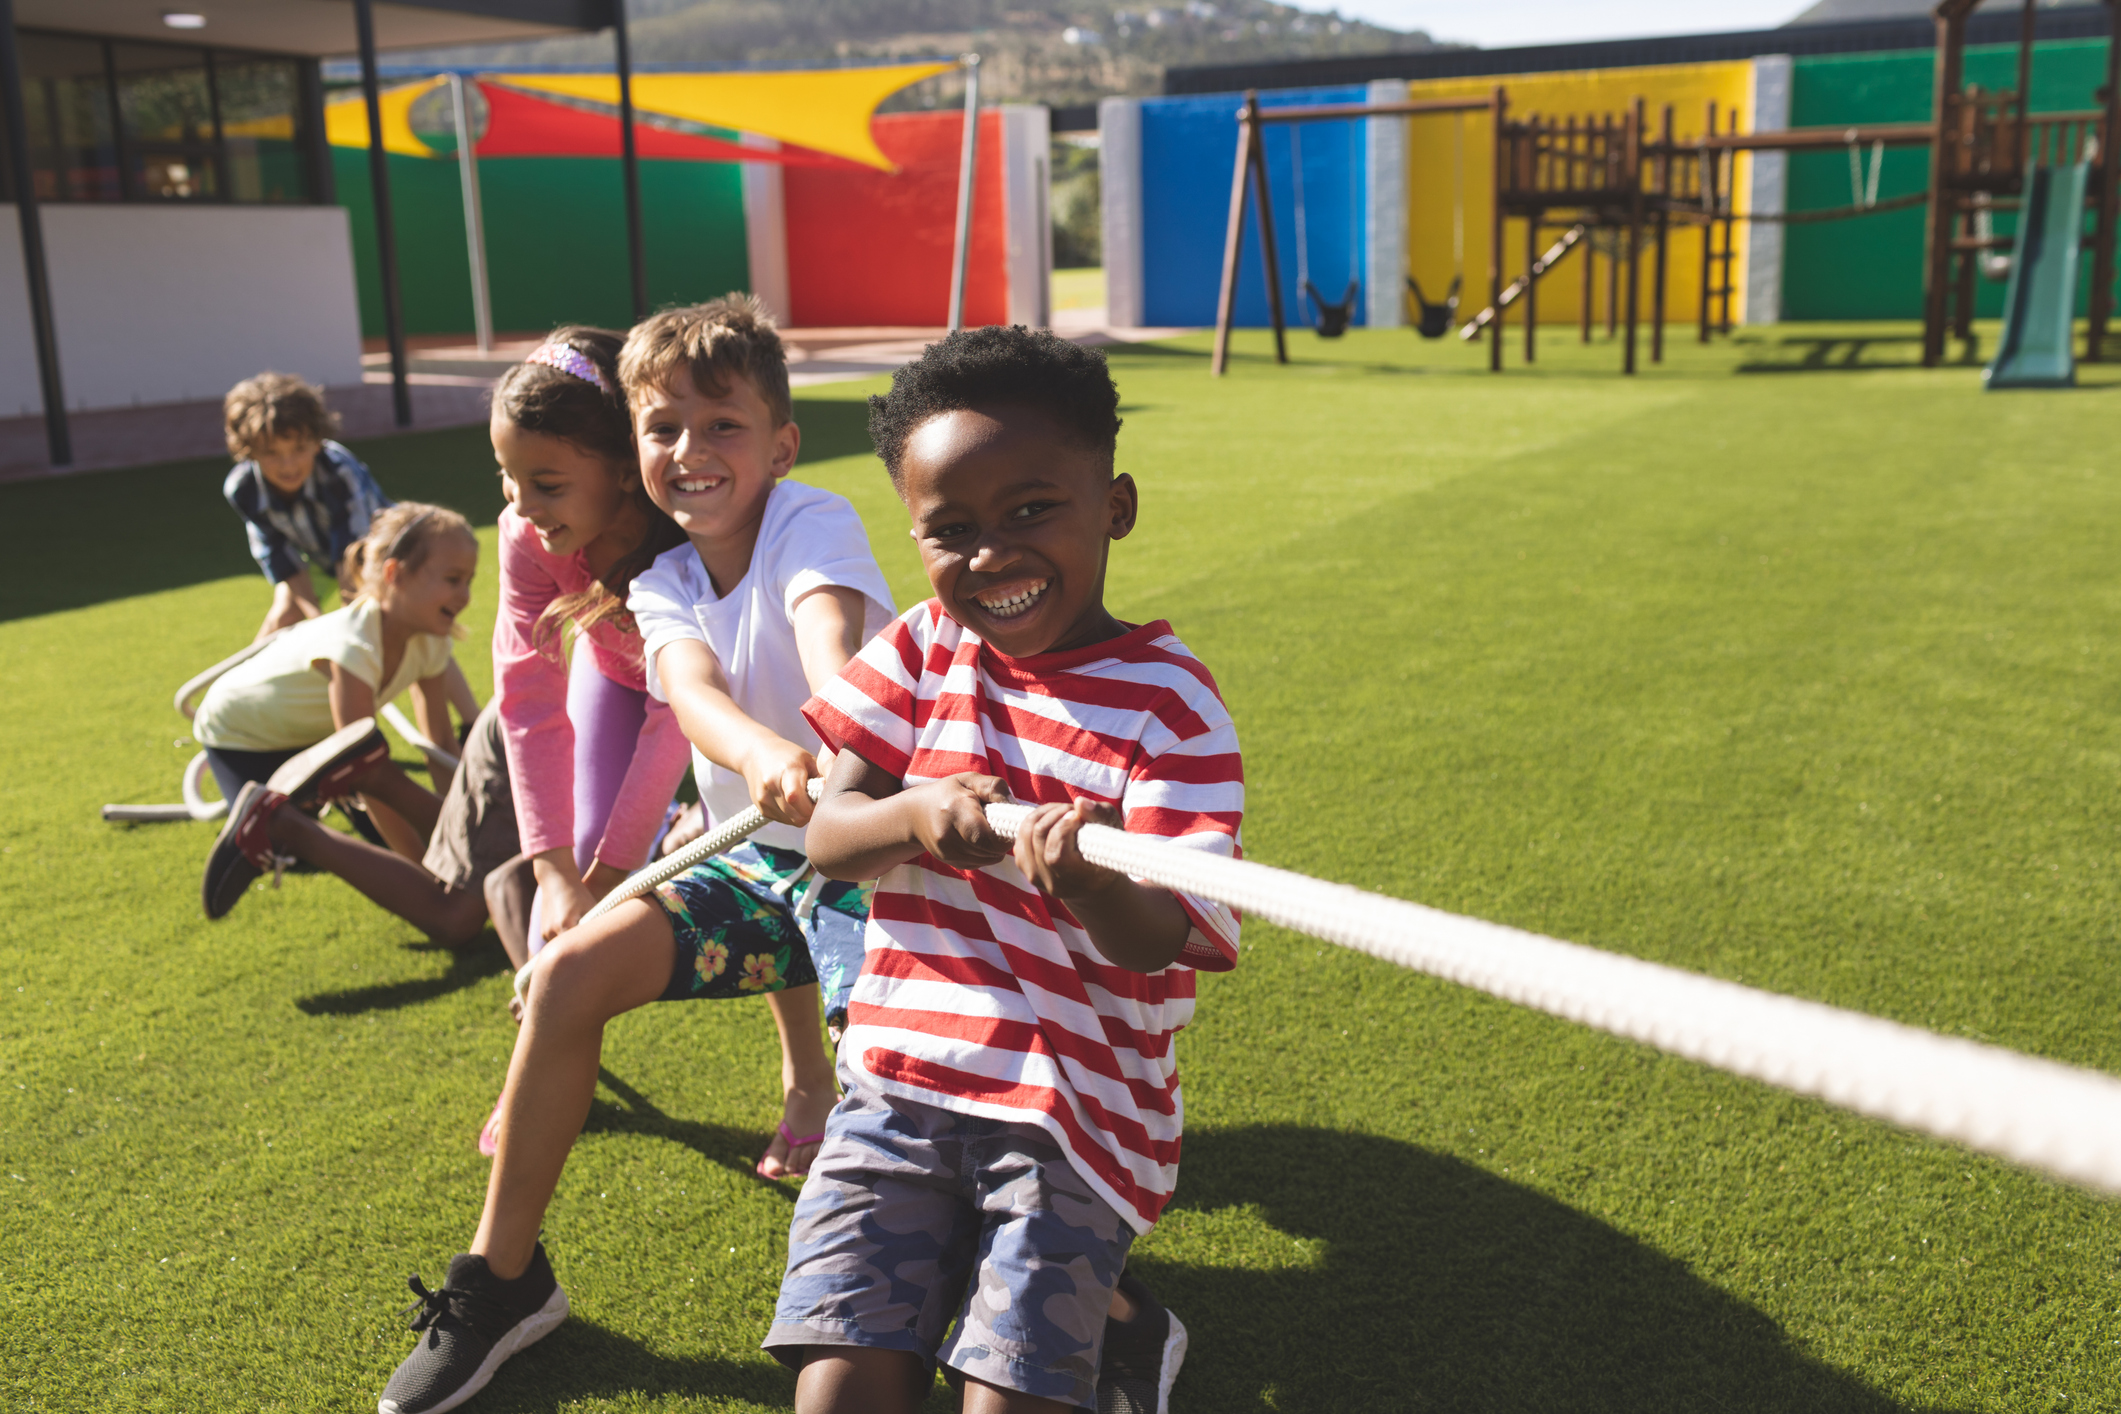 Why You Should Consider Artificial Grass in Your Child’s Outdoor Play Area